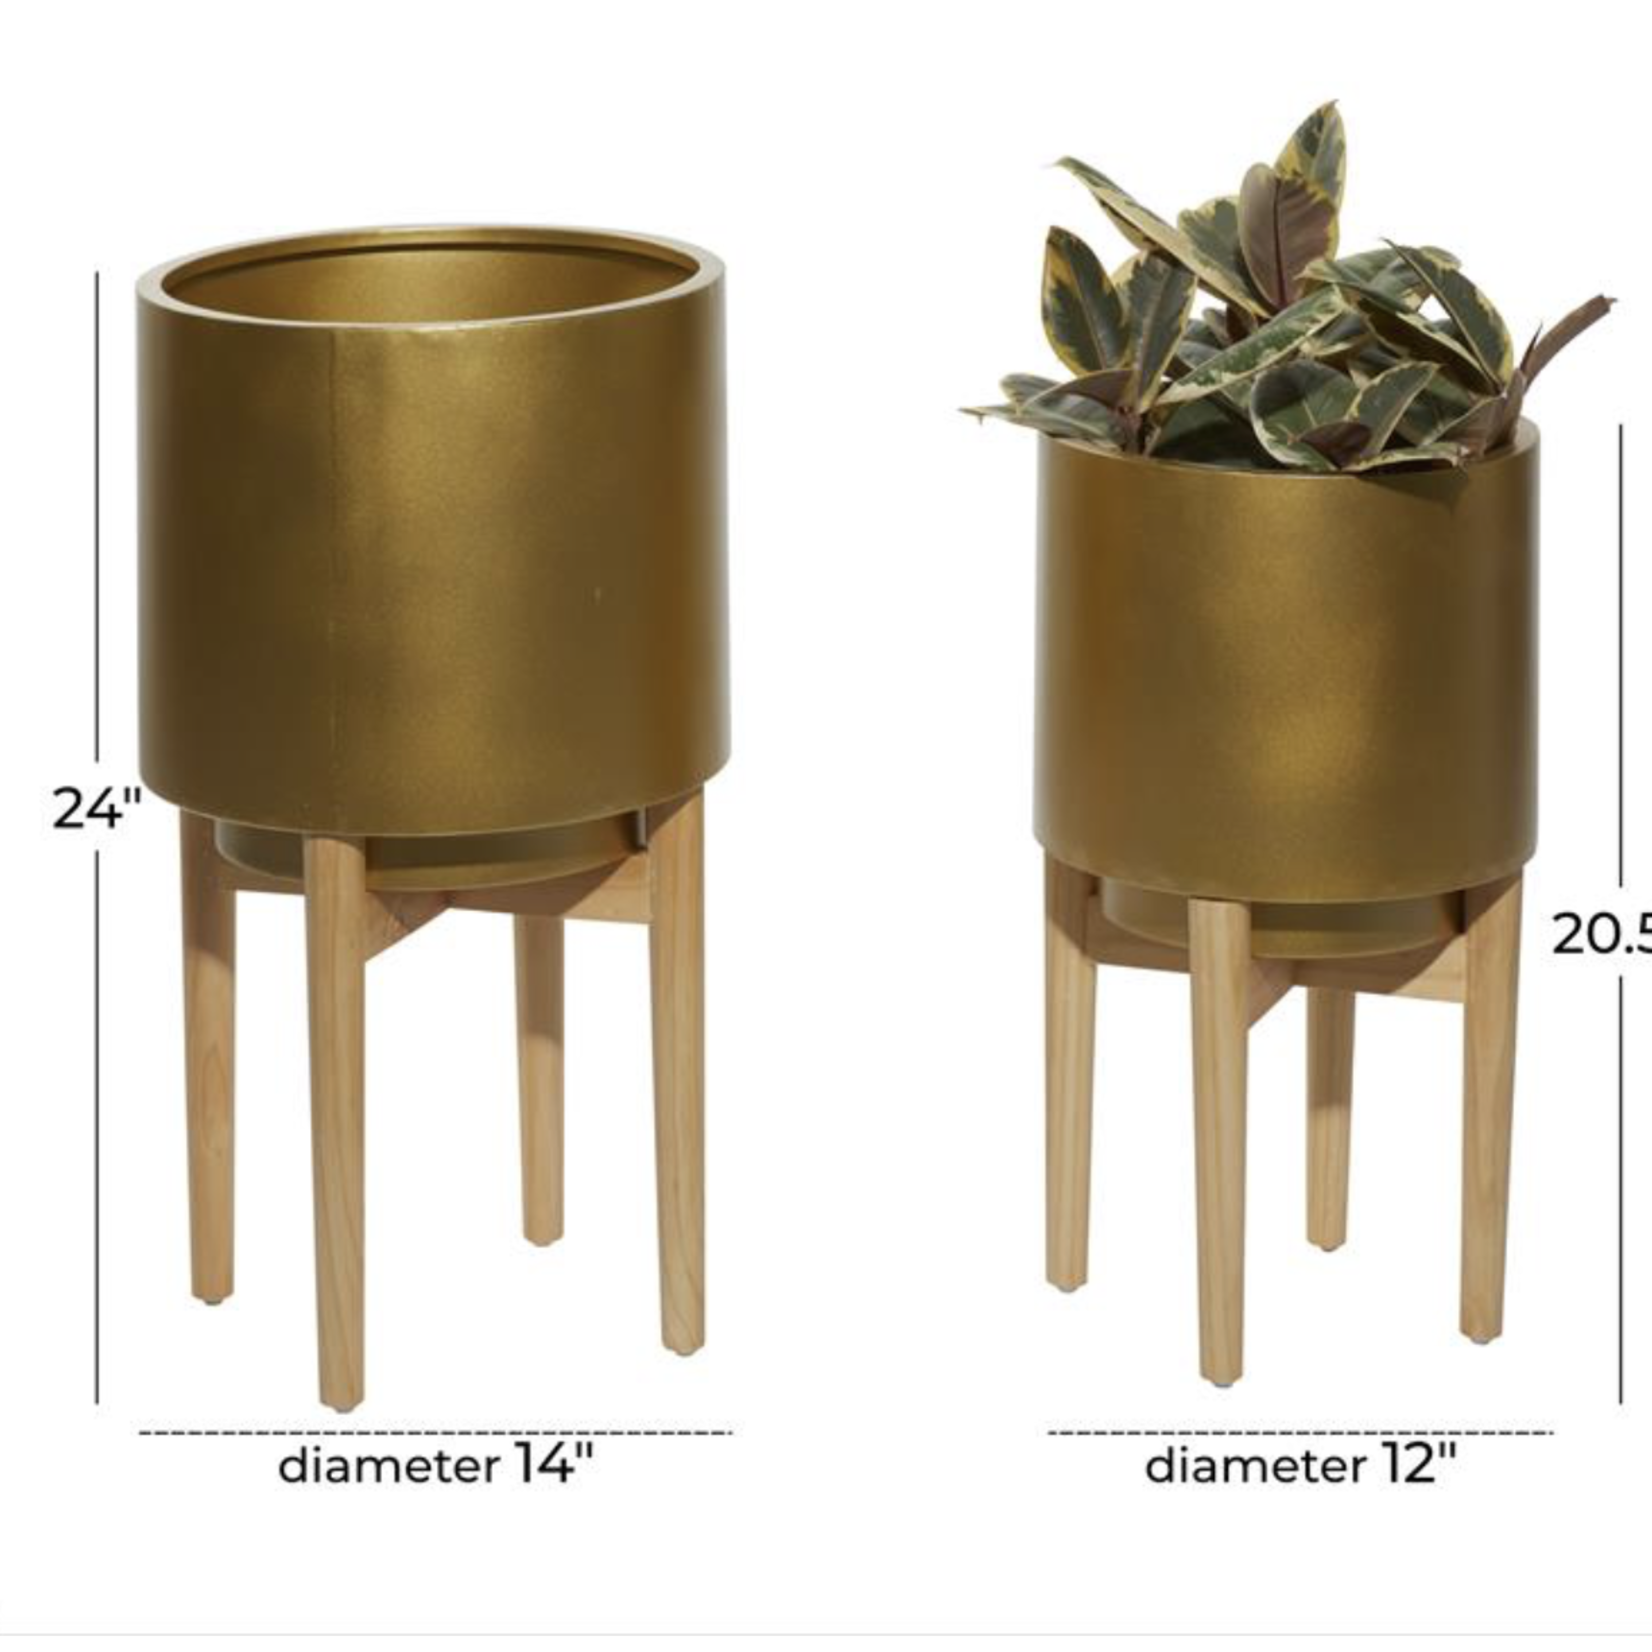 24”H X 14” LARGE GOLD METAL PLANTER WITH WOOD STAND (NOT WATER TIGHT)